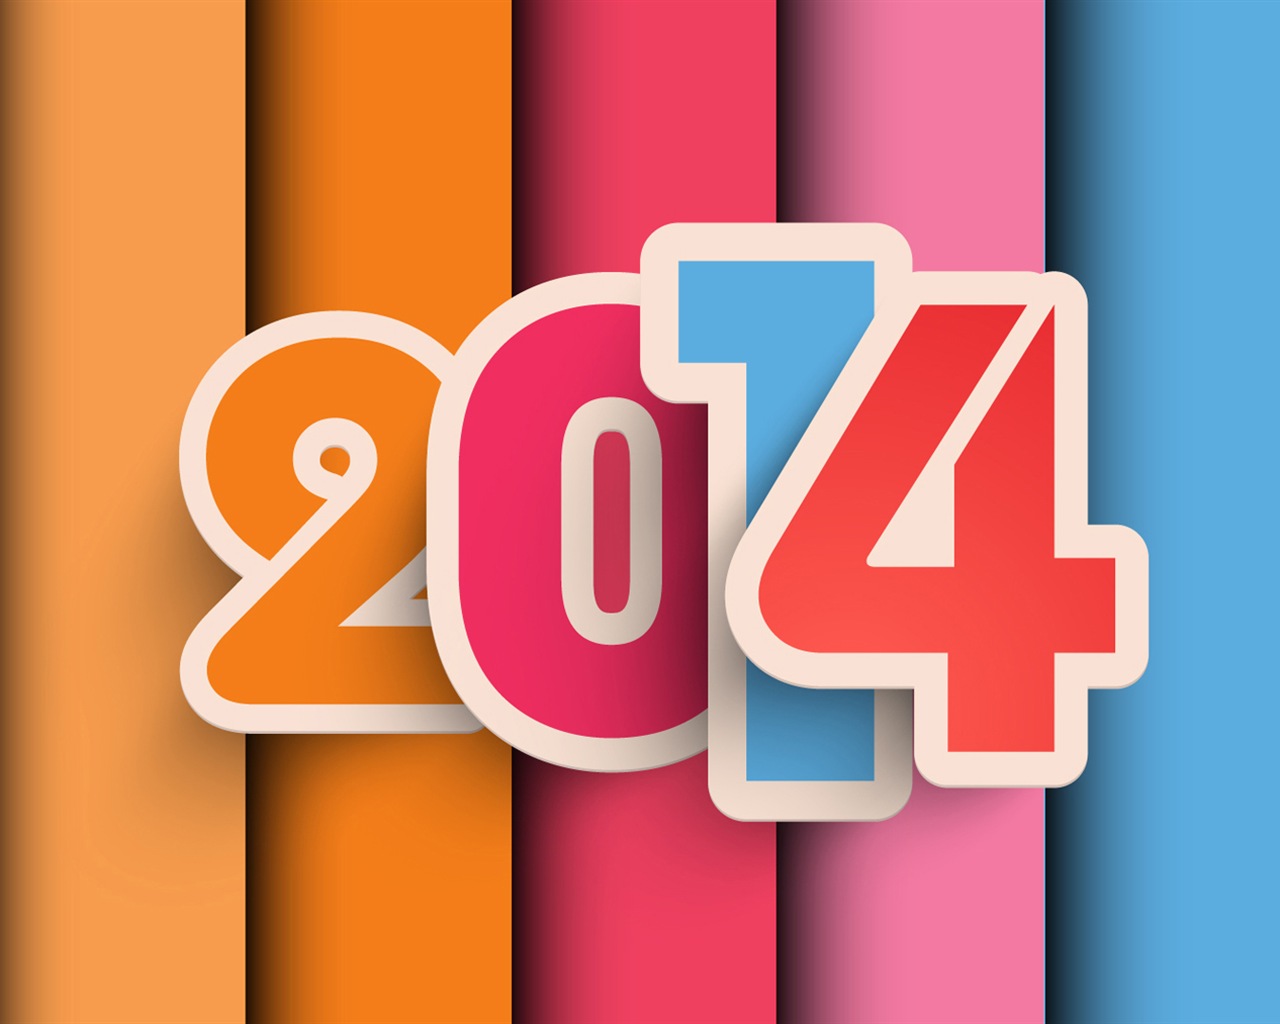 2014 New Year Theme HD Wallpapers (1) #9 - 1280x1024